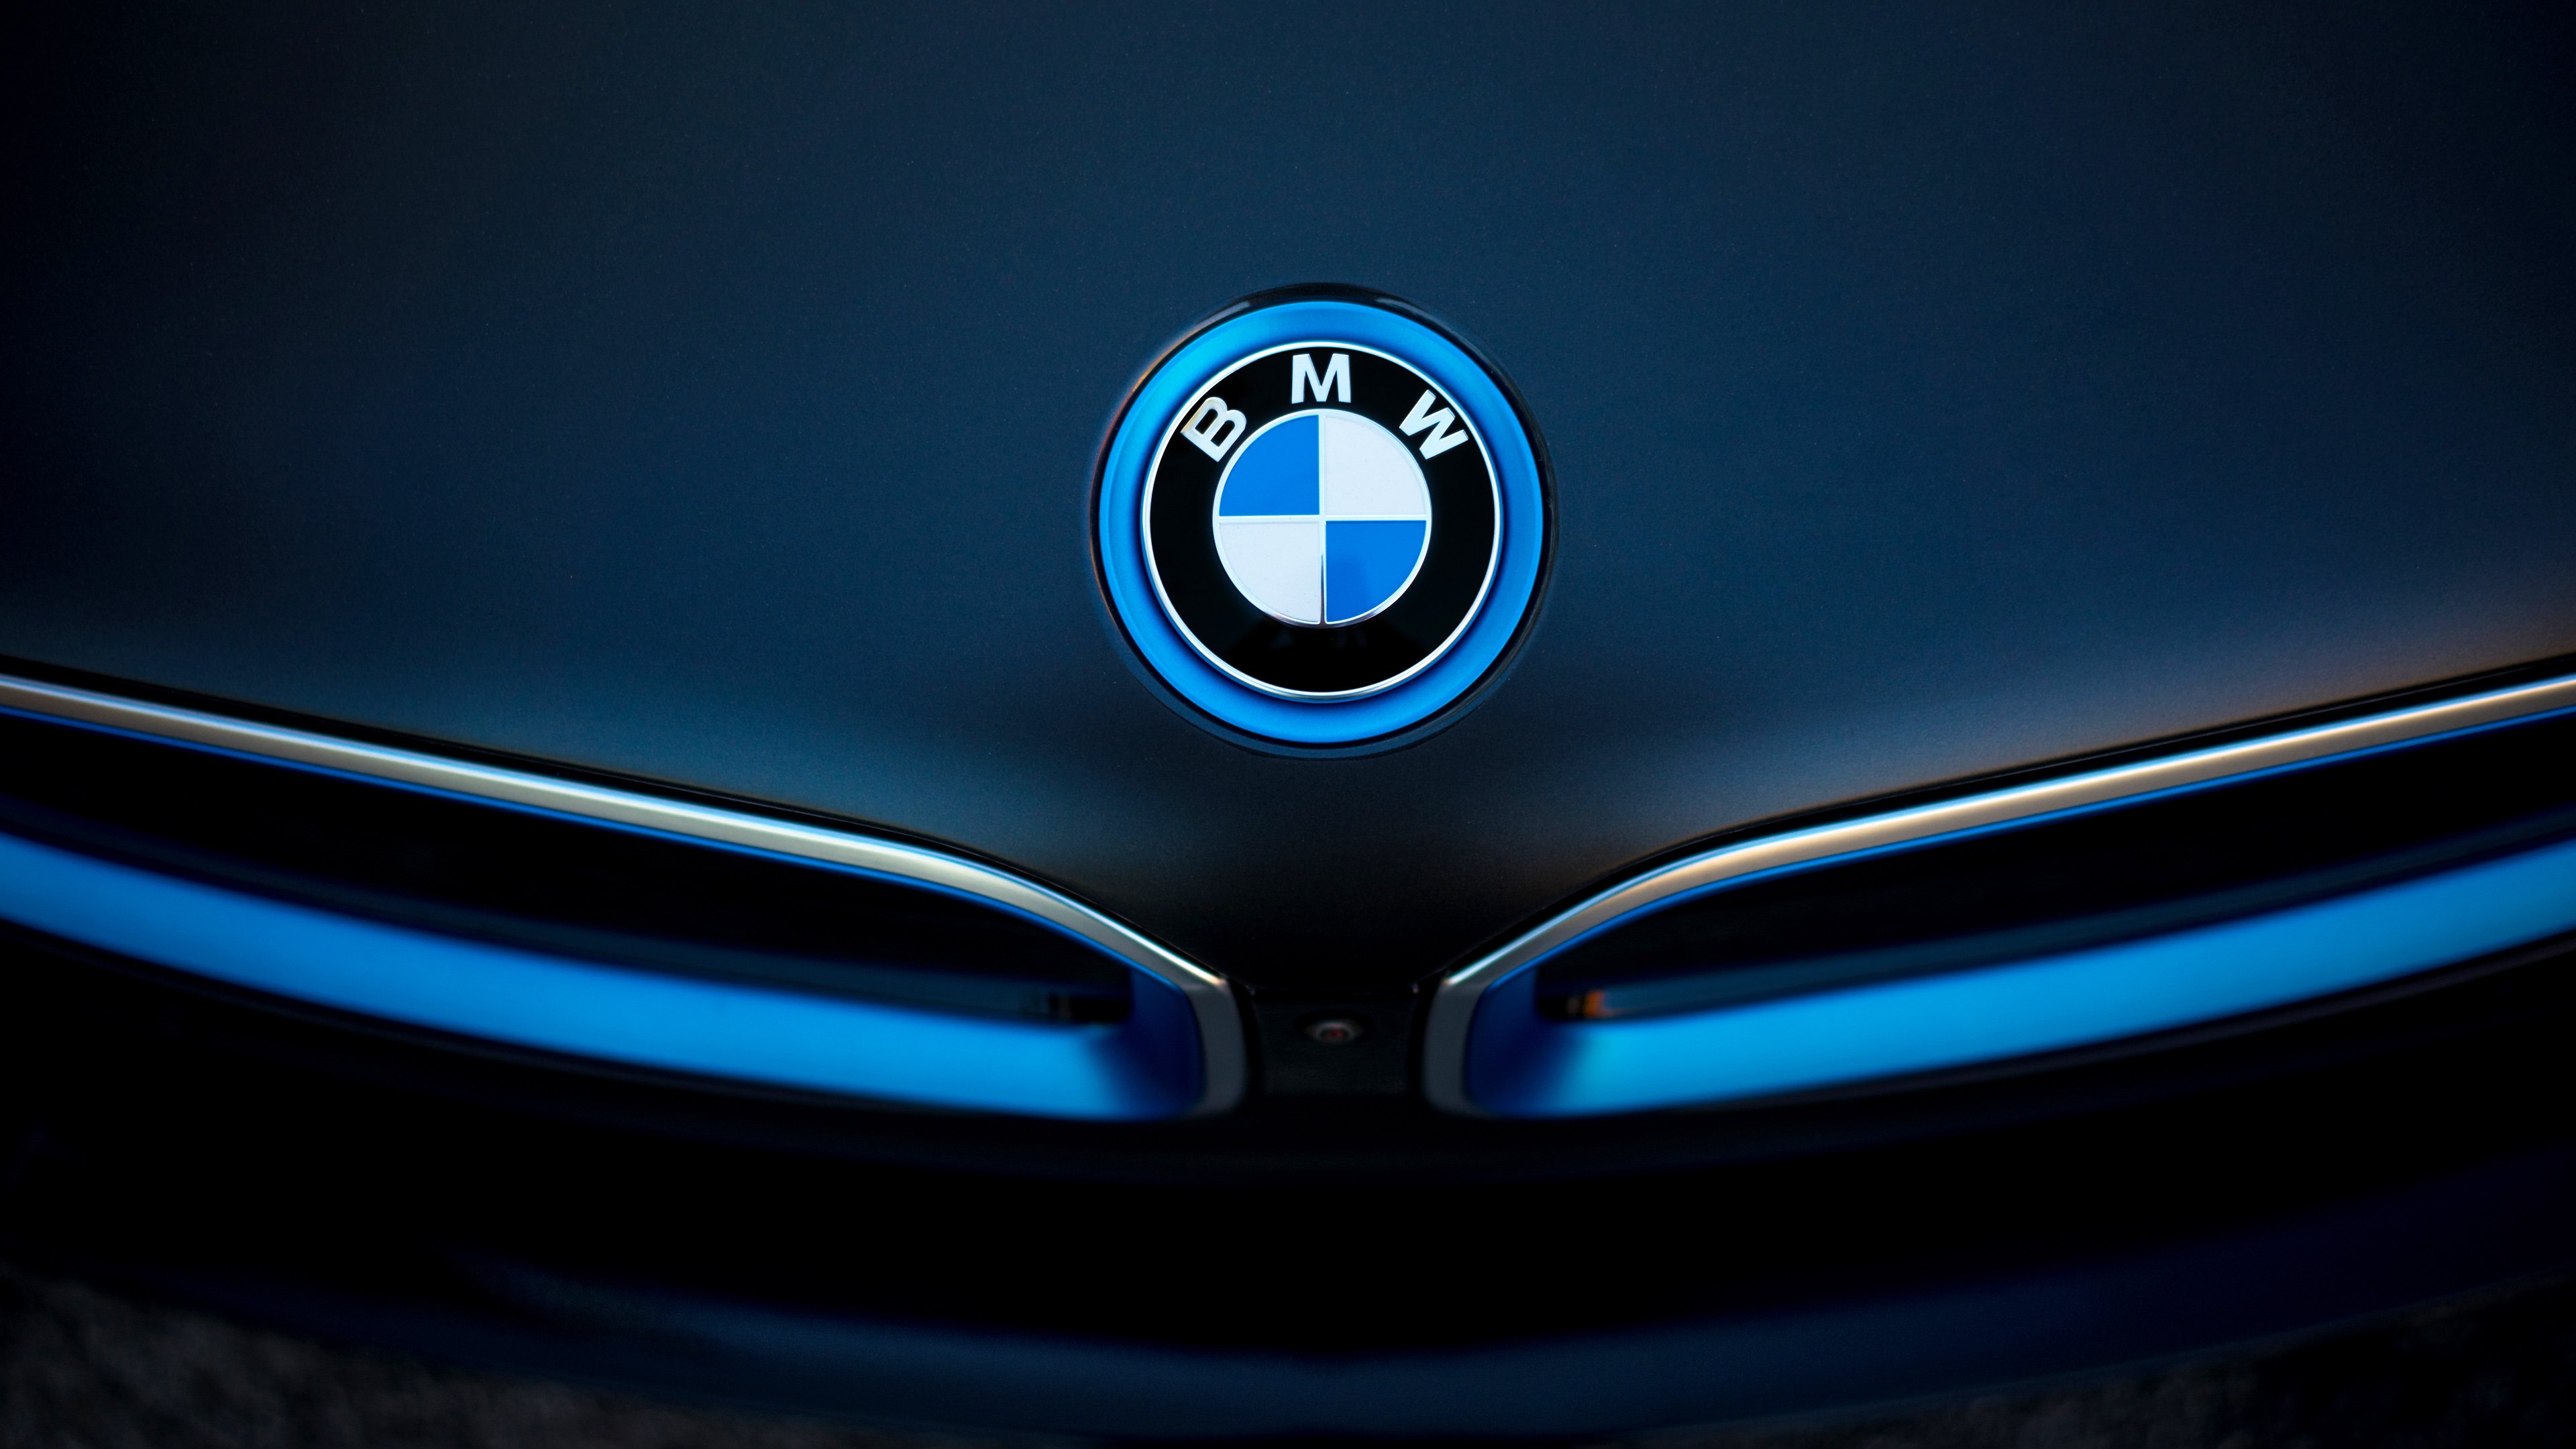 Bmw Car Wallpaper HD For Mobile